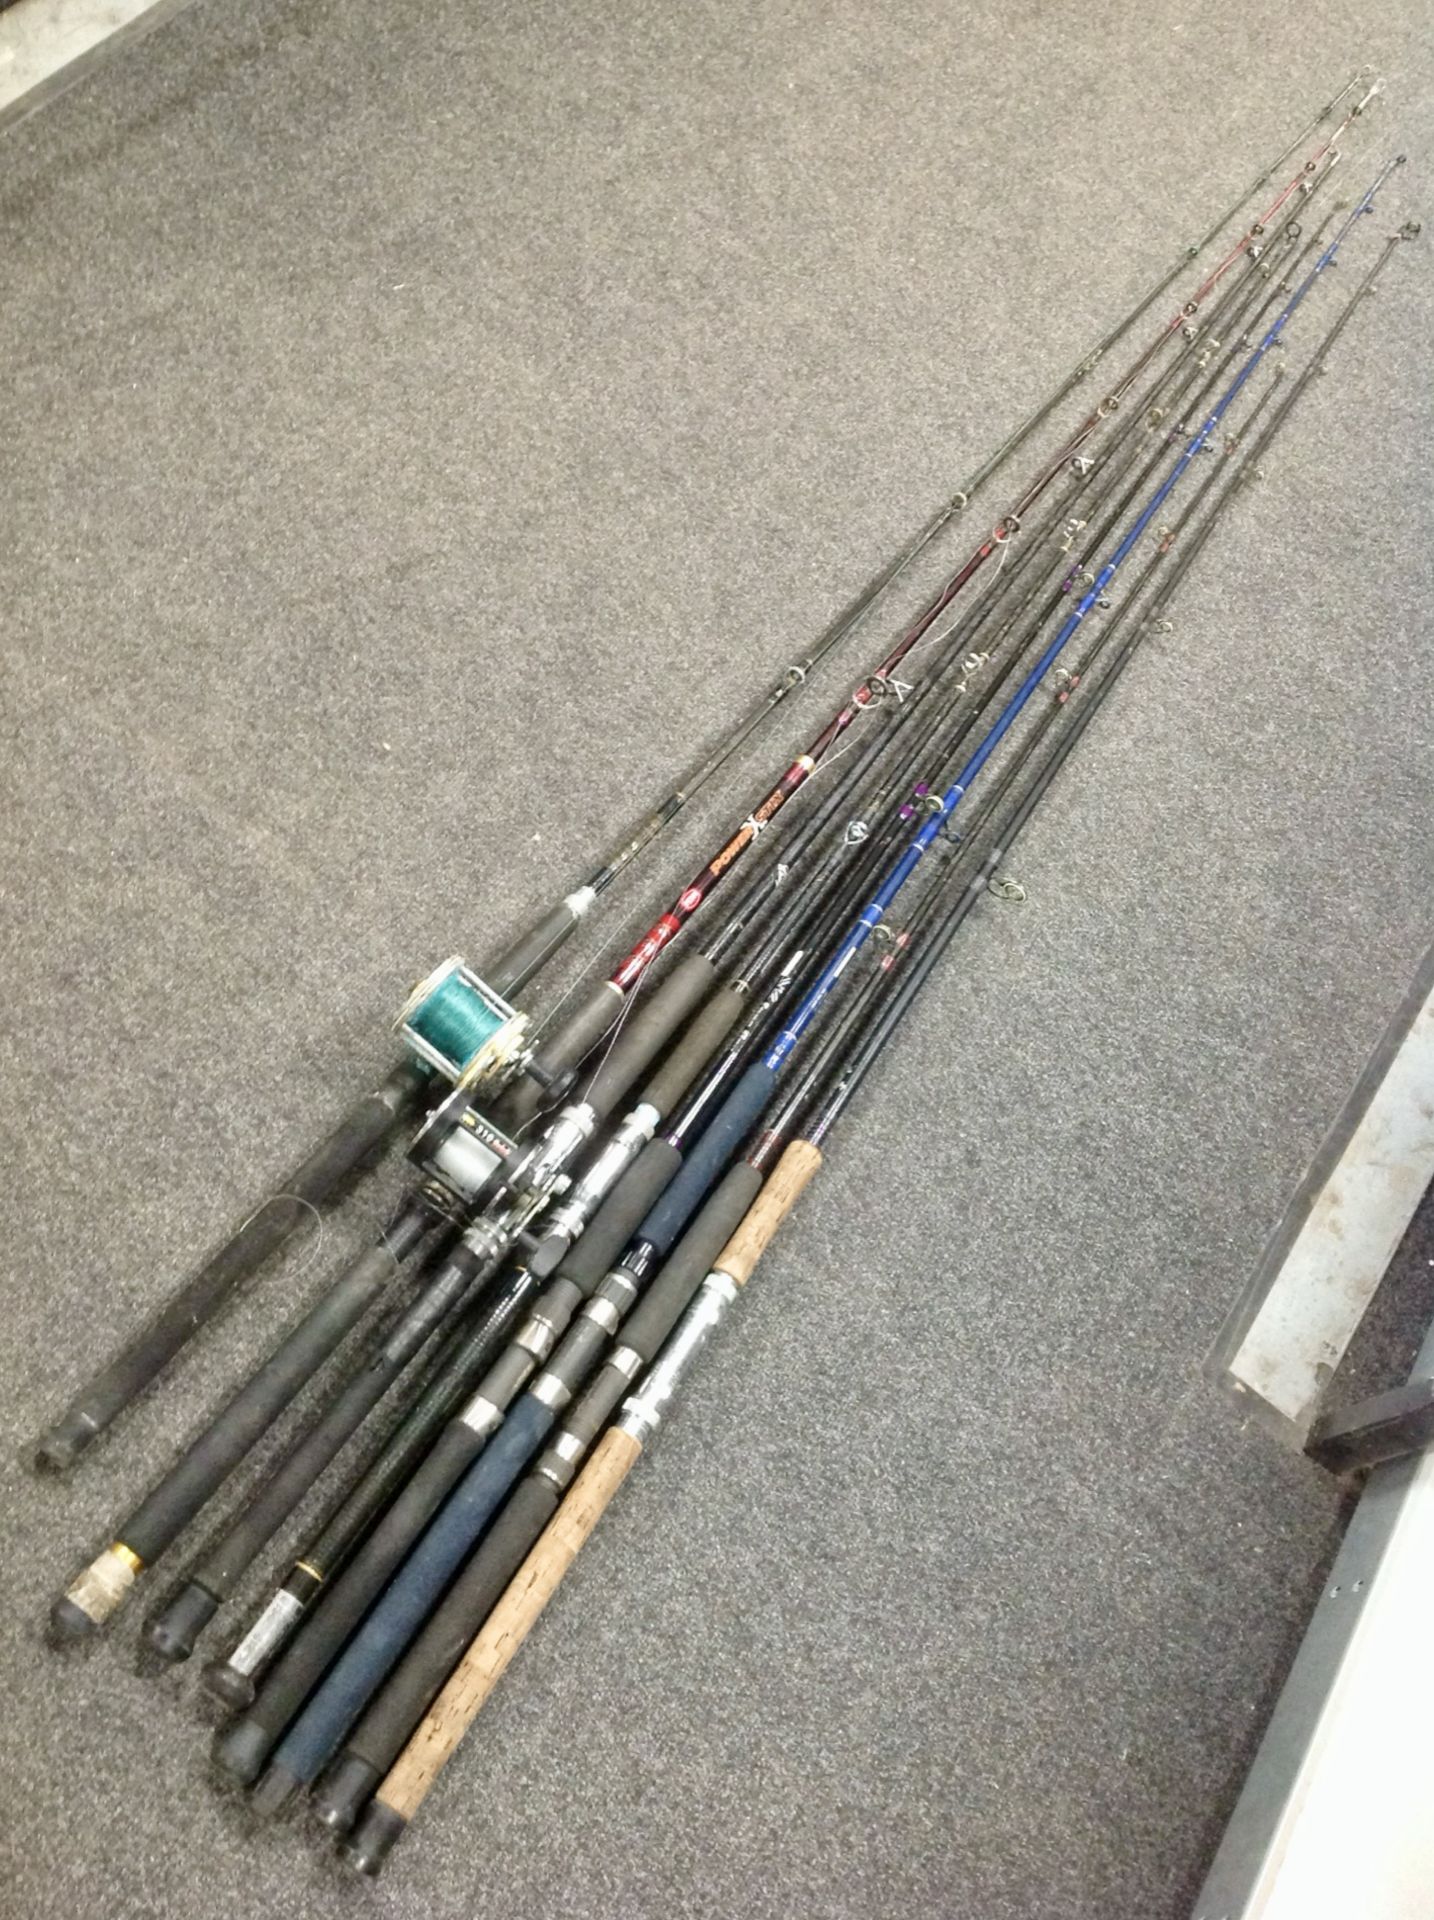 A group of fishing rods including Abu Garcia, Shakespeare, etc.